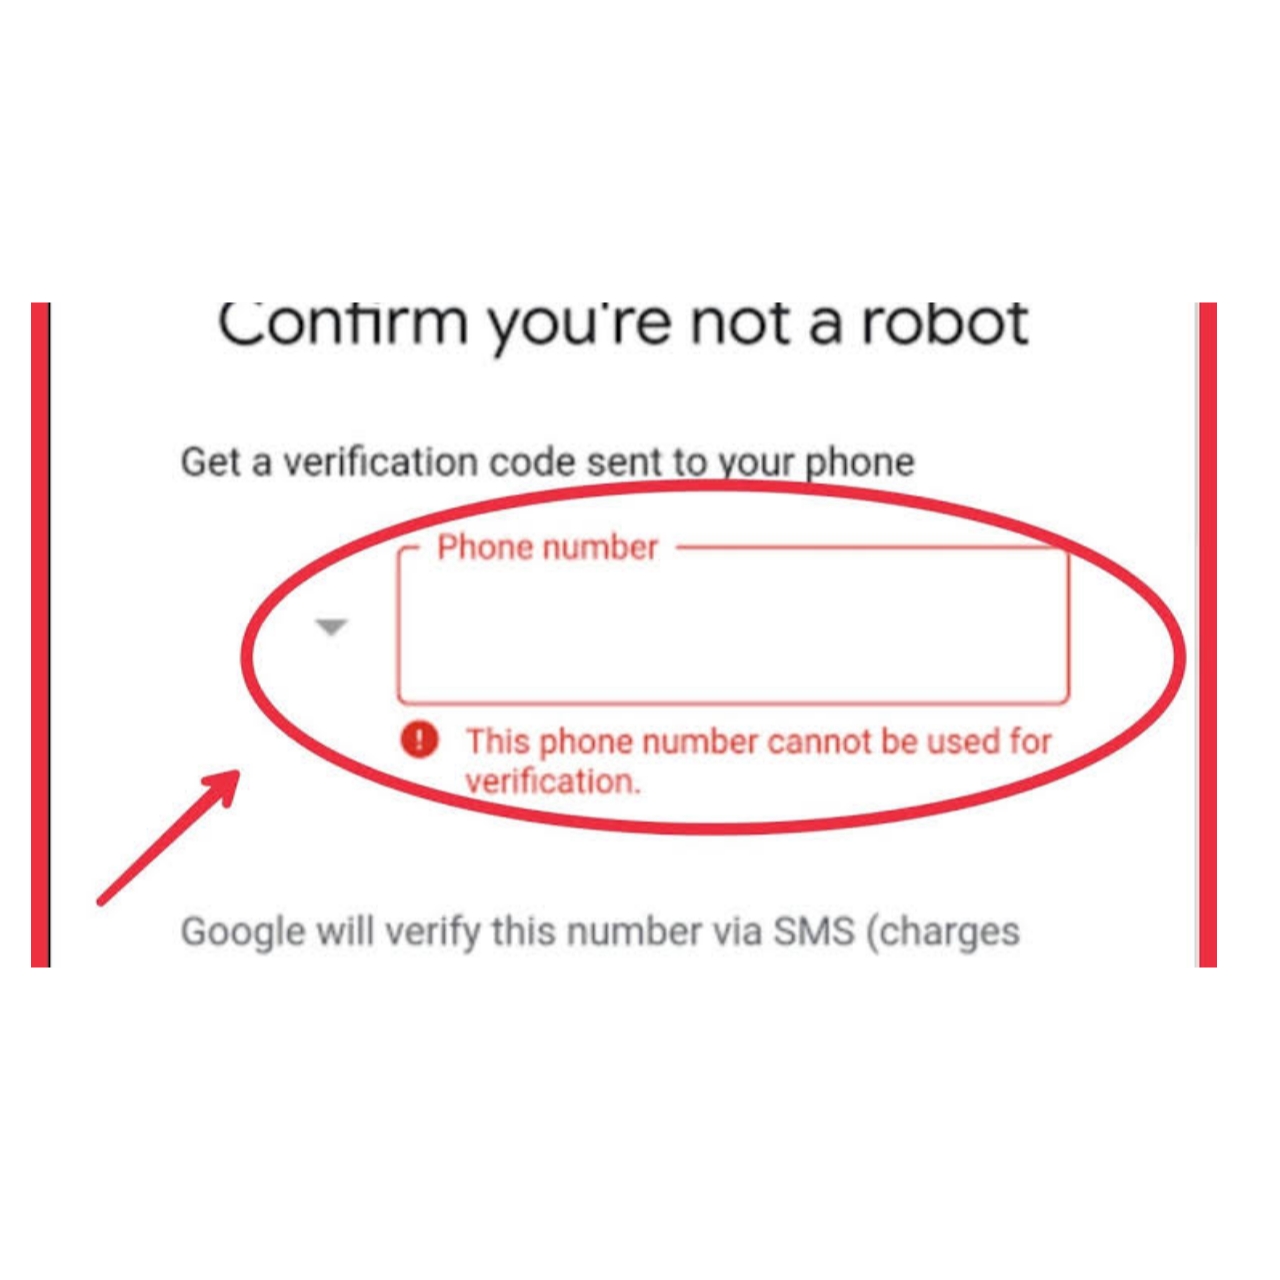 This phone number cannot be used for verification